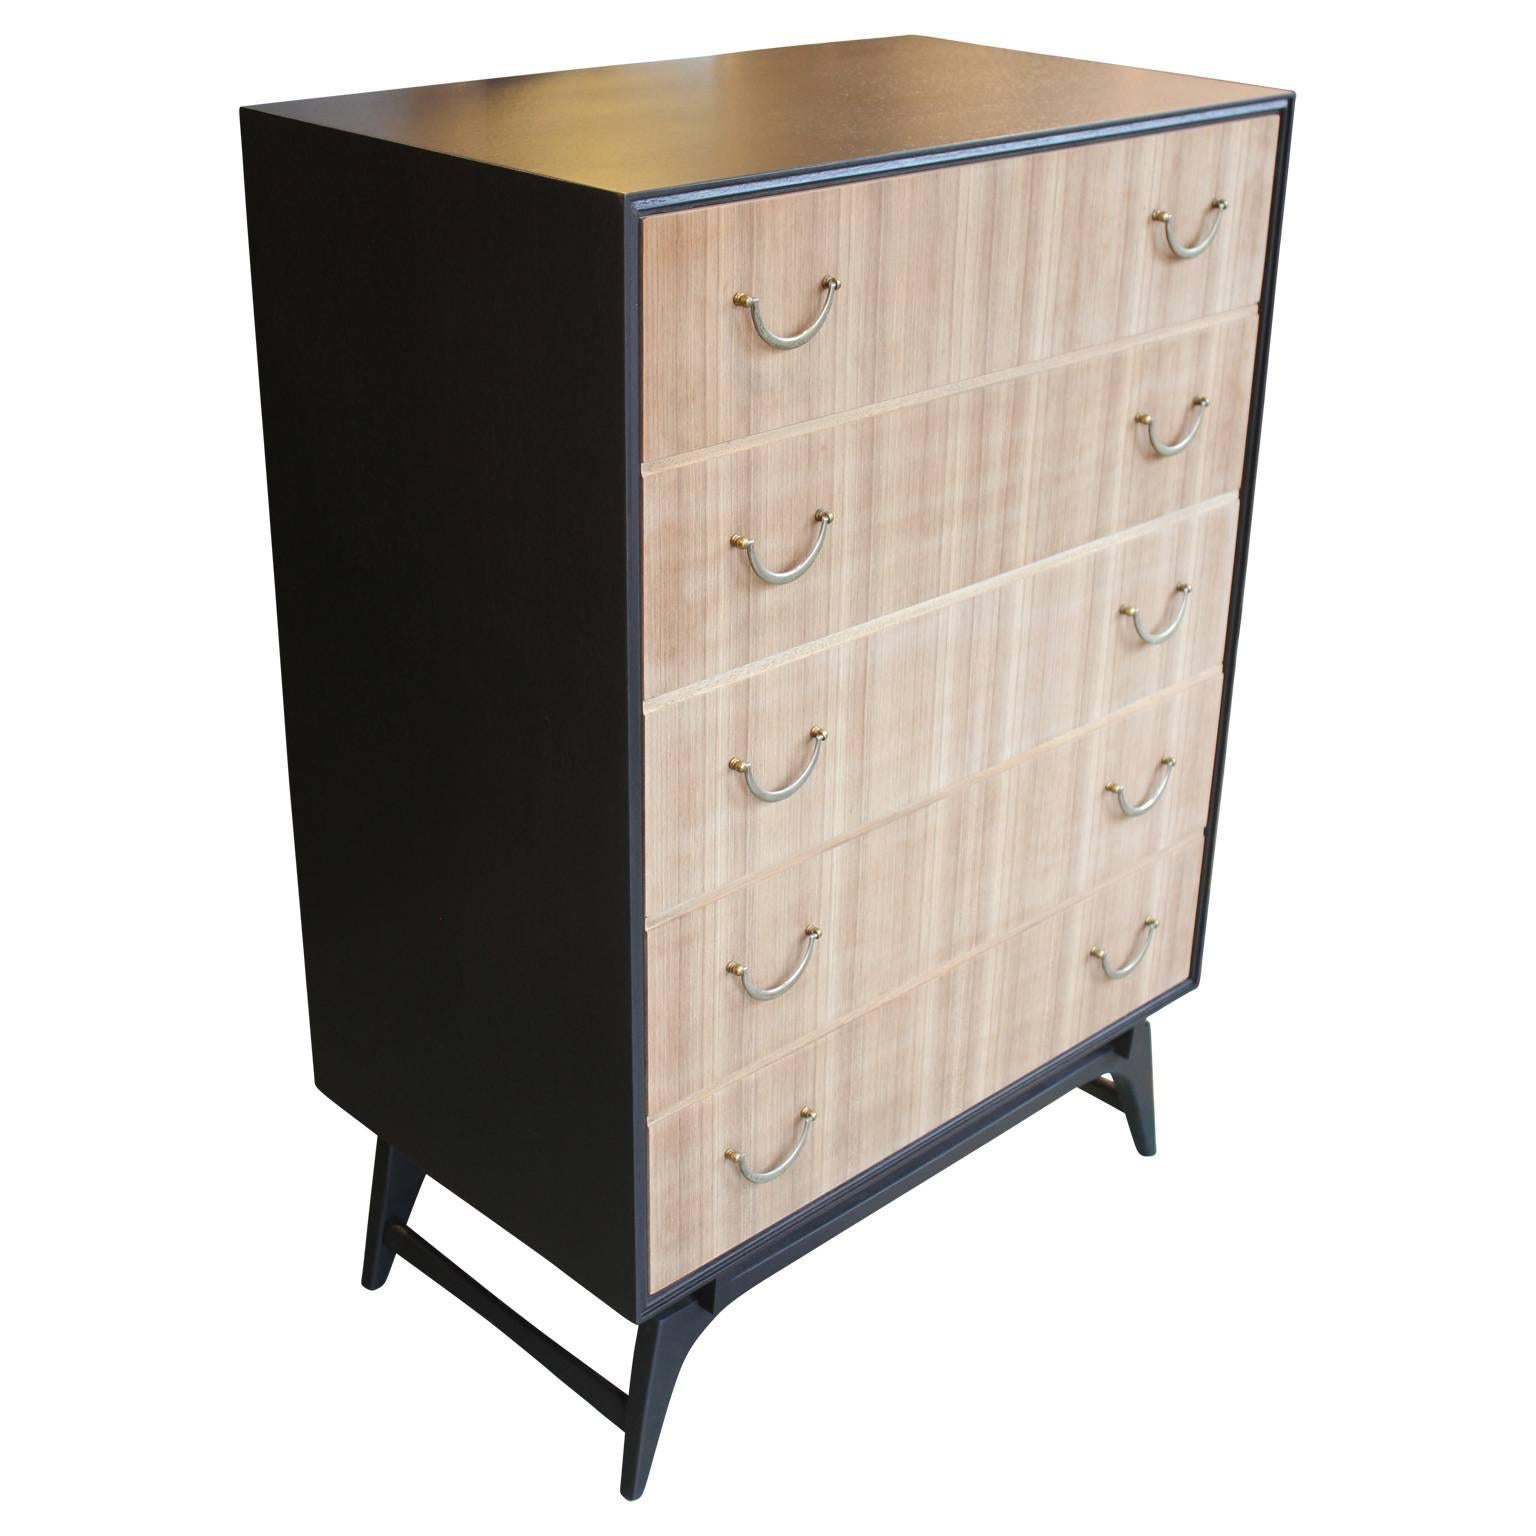 Gorgeous five-drawer bleached walnut dresser or chest of drawers in the style of Baker Furniture, Dunbar or Gio Ponti. This piece has been recently lacquered in a nice black and the drawer faces have been bleached. The hardware has a lovely natural